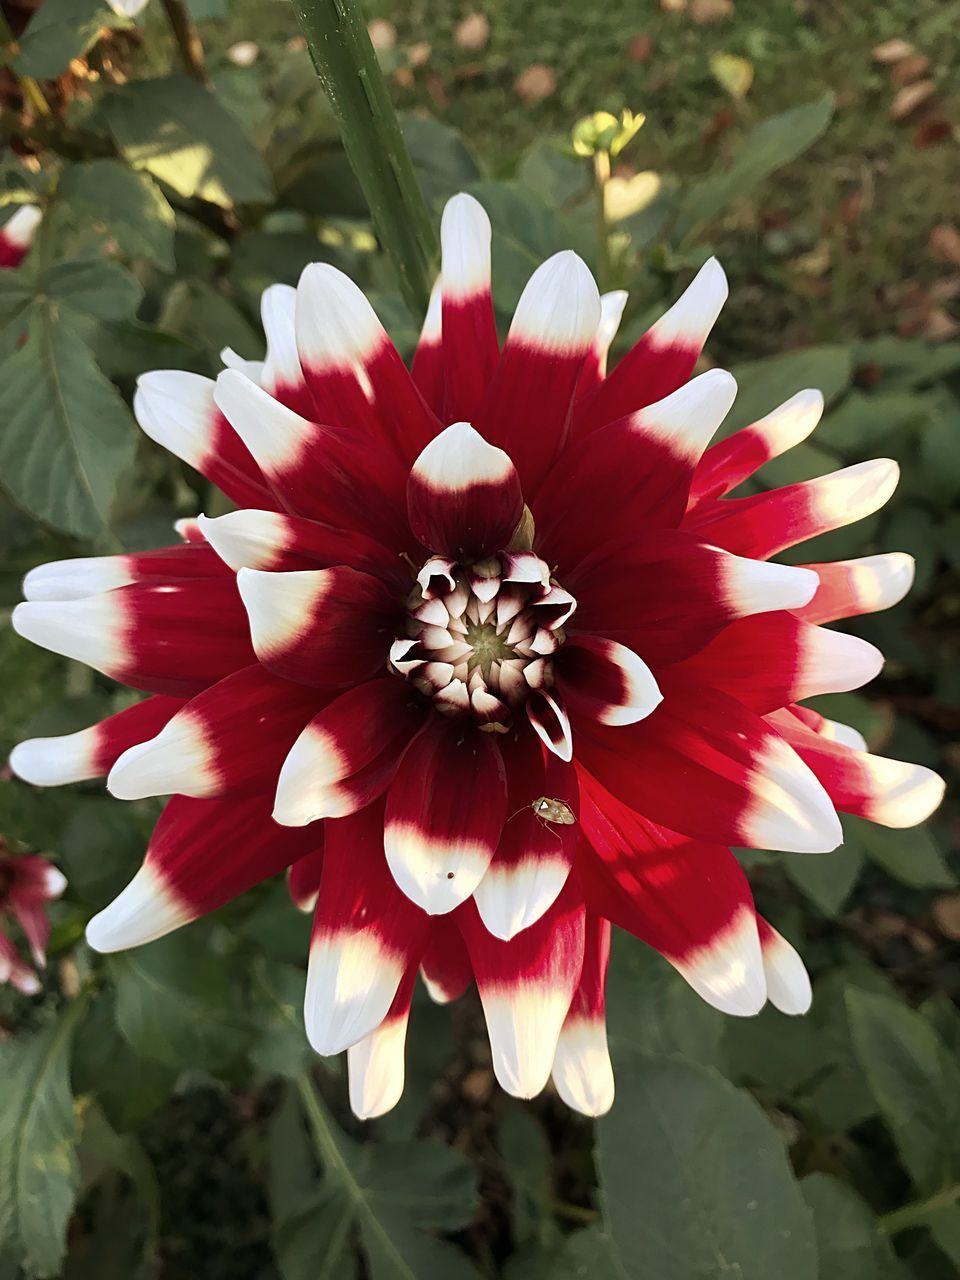 CLOSE-UP OF RED AND WHITE FLOWER